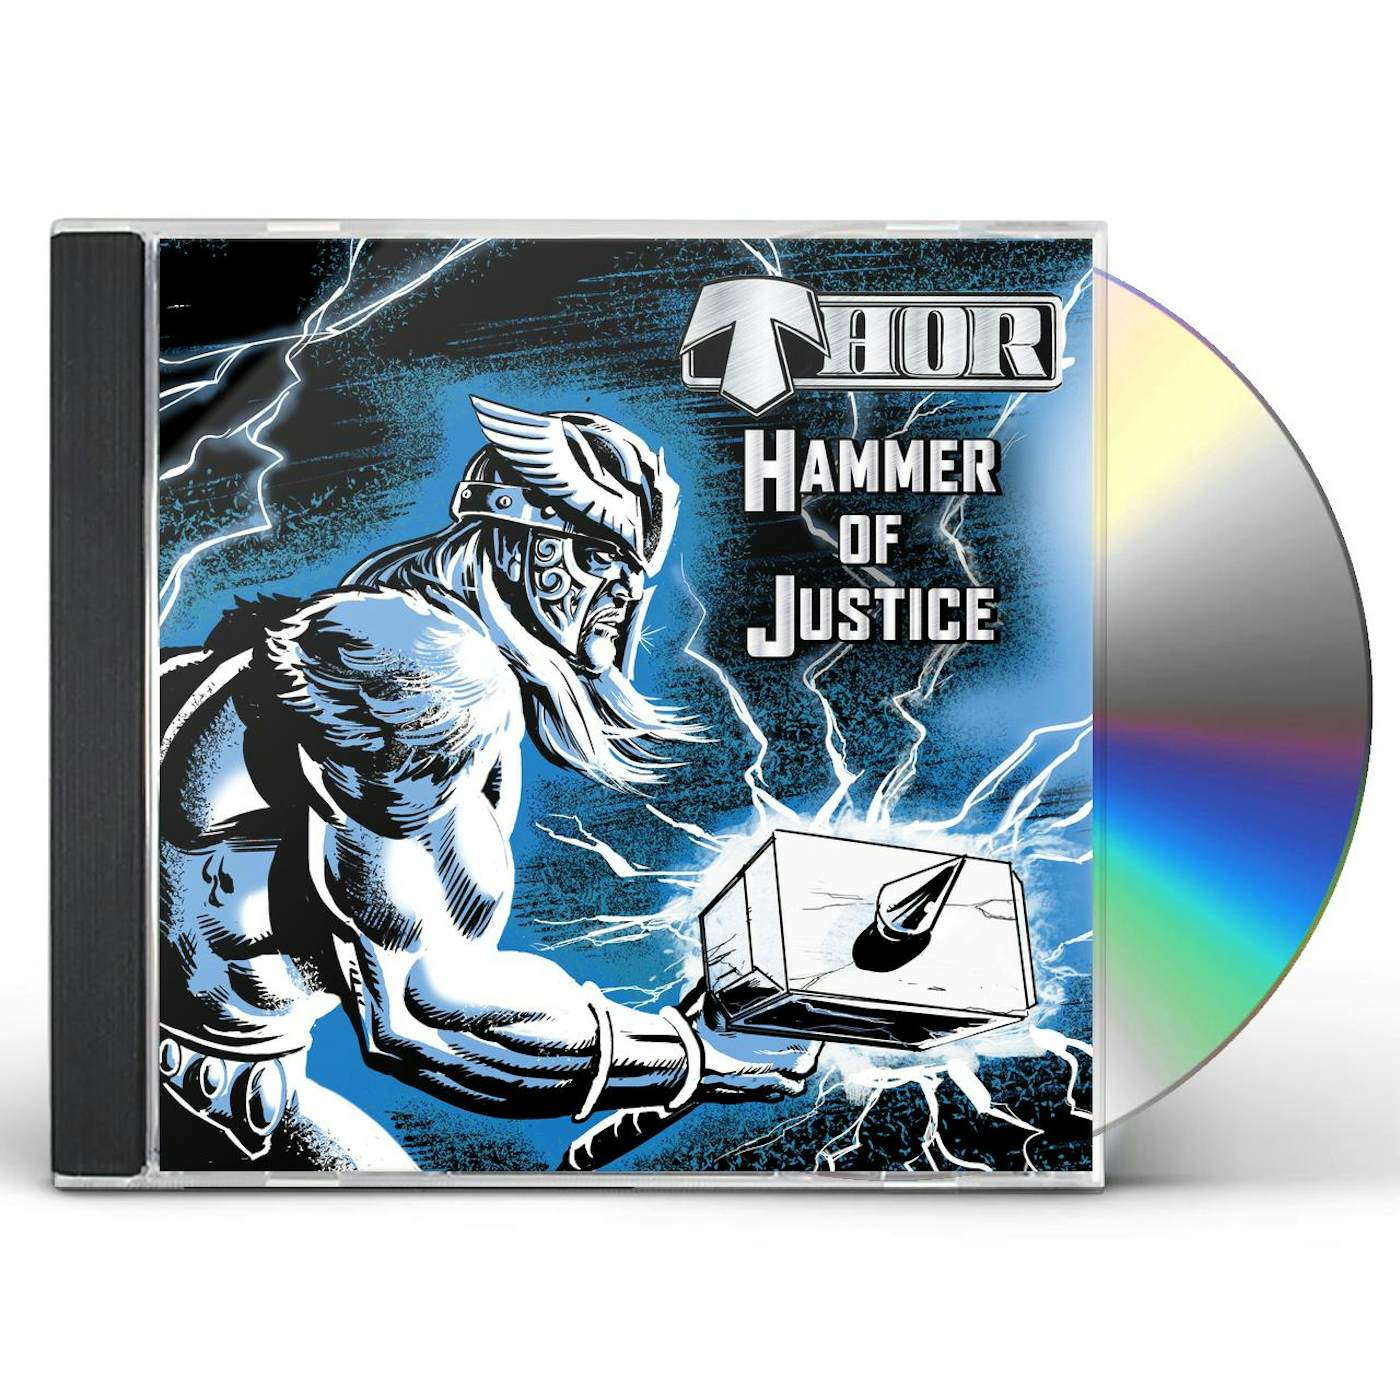 Thor HAMMER OF JUSTICE CD